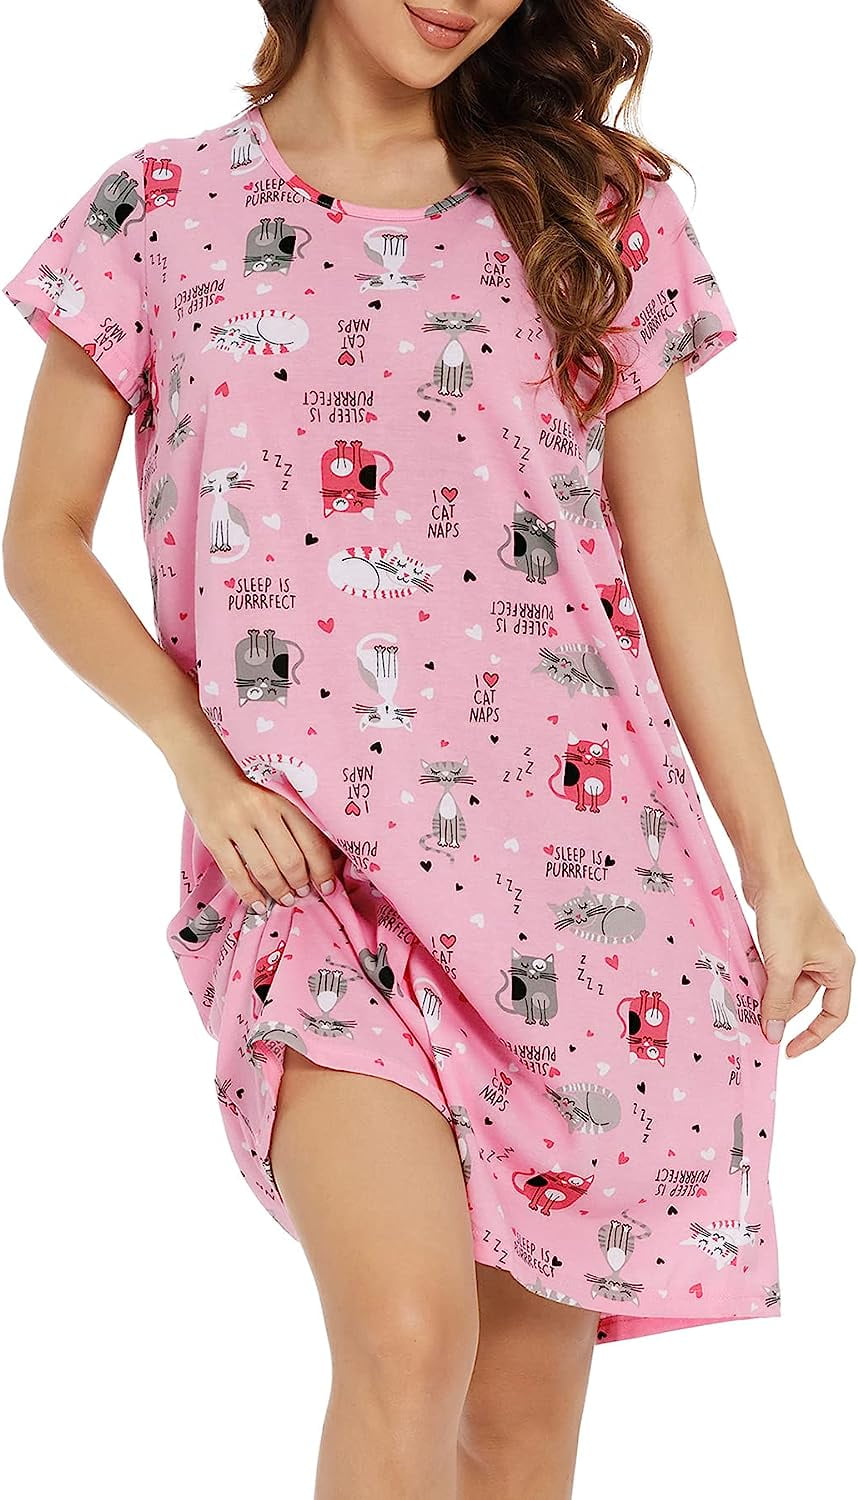 FOREEMME Nightgowns for Women Cotton Night Shirts Short Sleeve Night ...